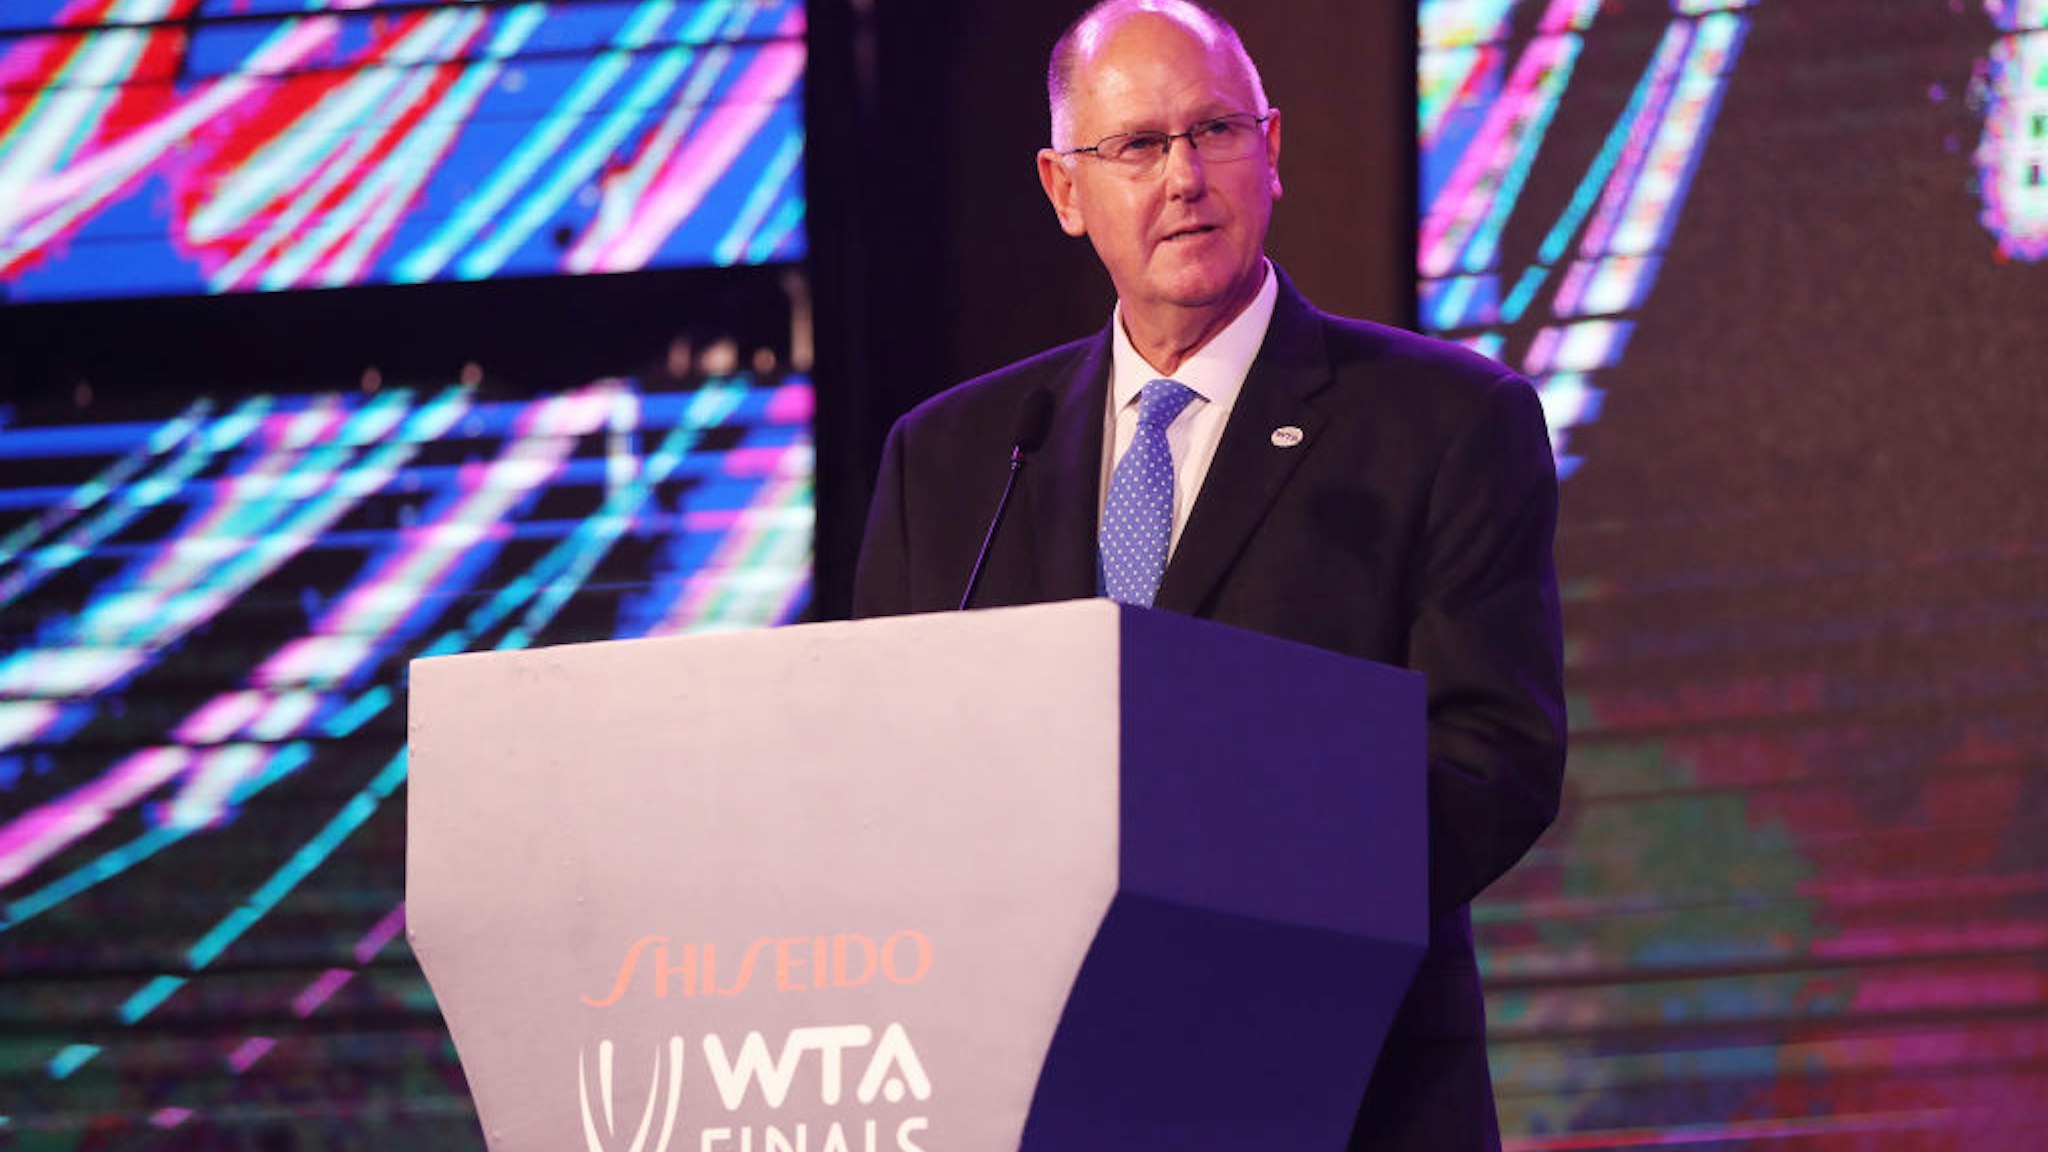 SHENZHEN, CHINA - OCTOBER 25: CEO and Chairman of the WTA Steve Simon delivers a speech during the Official Draw Ceremony and Gala of the 2019 WTA Finals at Hilton Shenzhen Shekou Nanhai on October 25, 2019 in Shenzhen, China. (Photo by Matthew Stockman/Getty Images)